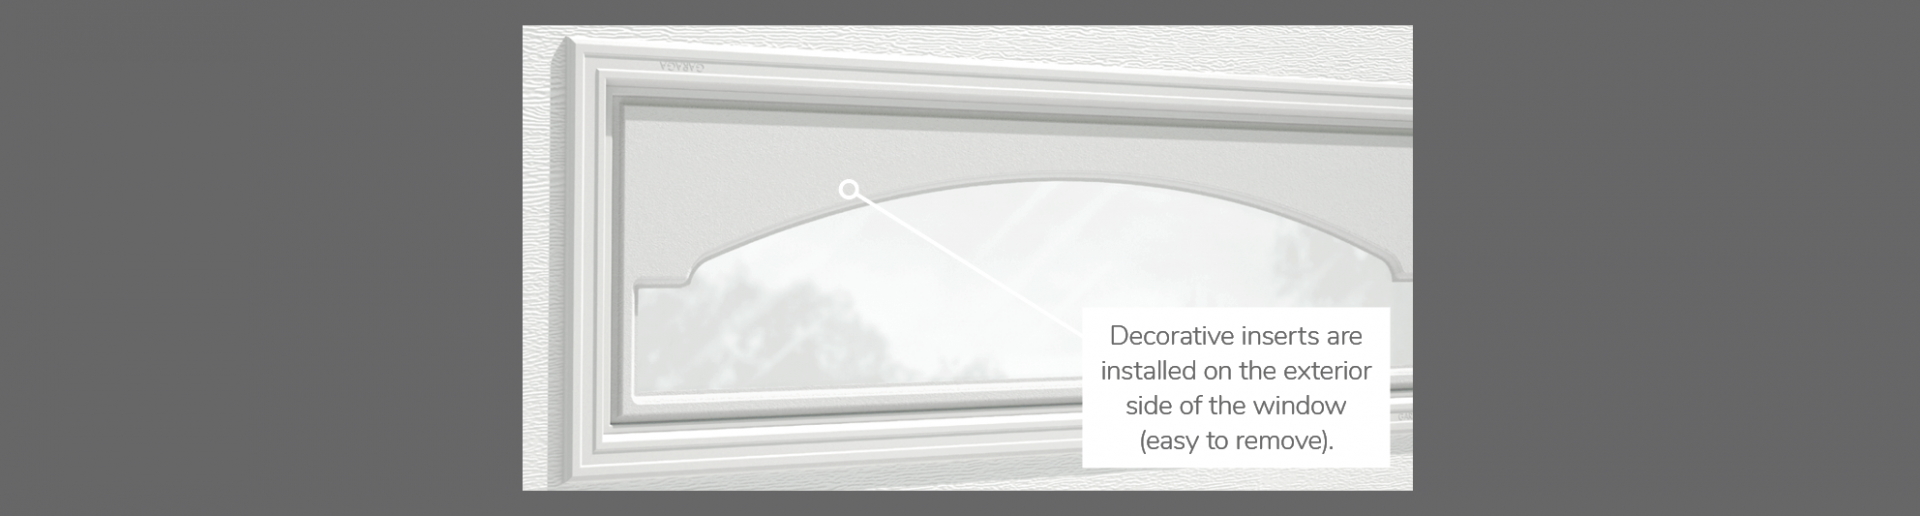 Cathedral Decorative Insert, 40" x 13", available for door R-16, R-12, 2 layers polystyrene and Non-insulated